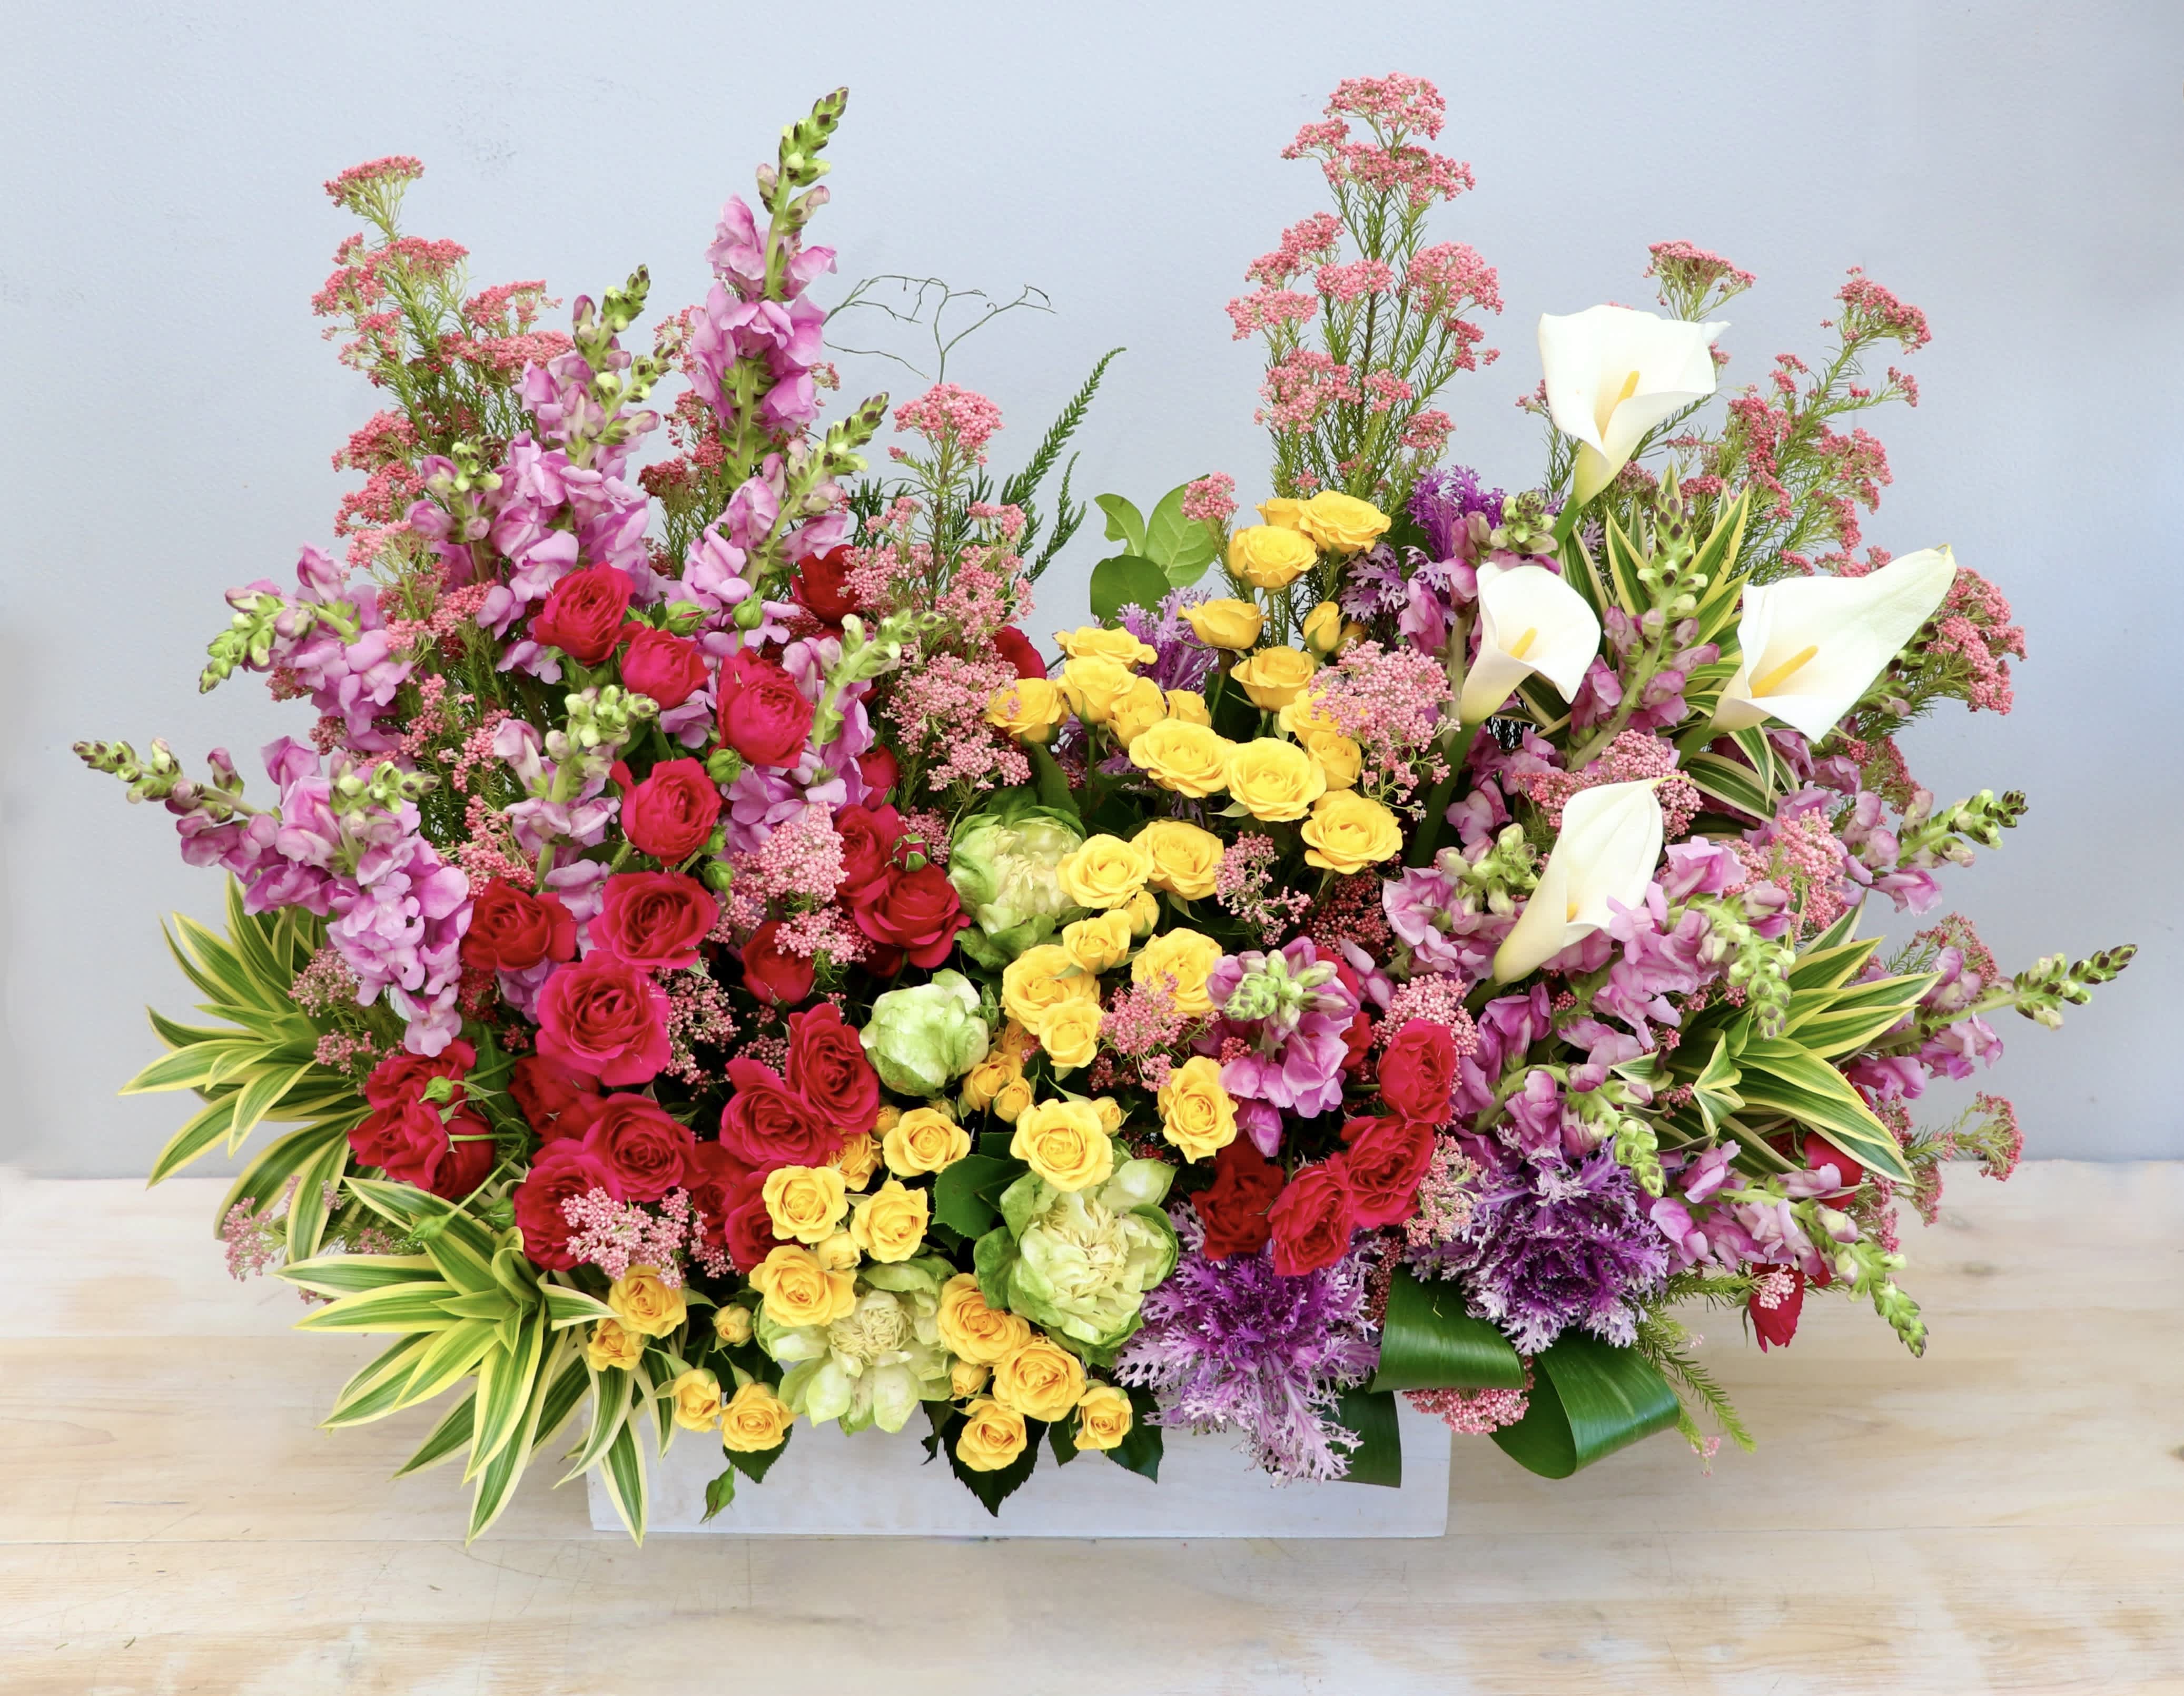 Pink and Yellow Garden Box - My Glendale Florist - This box arrangement is made a with bright yellow spray roses and pink blooms in varying shades. 